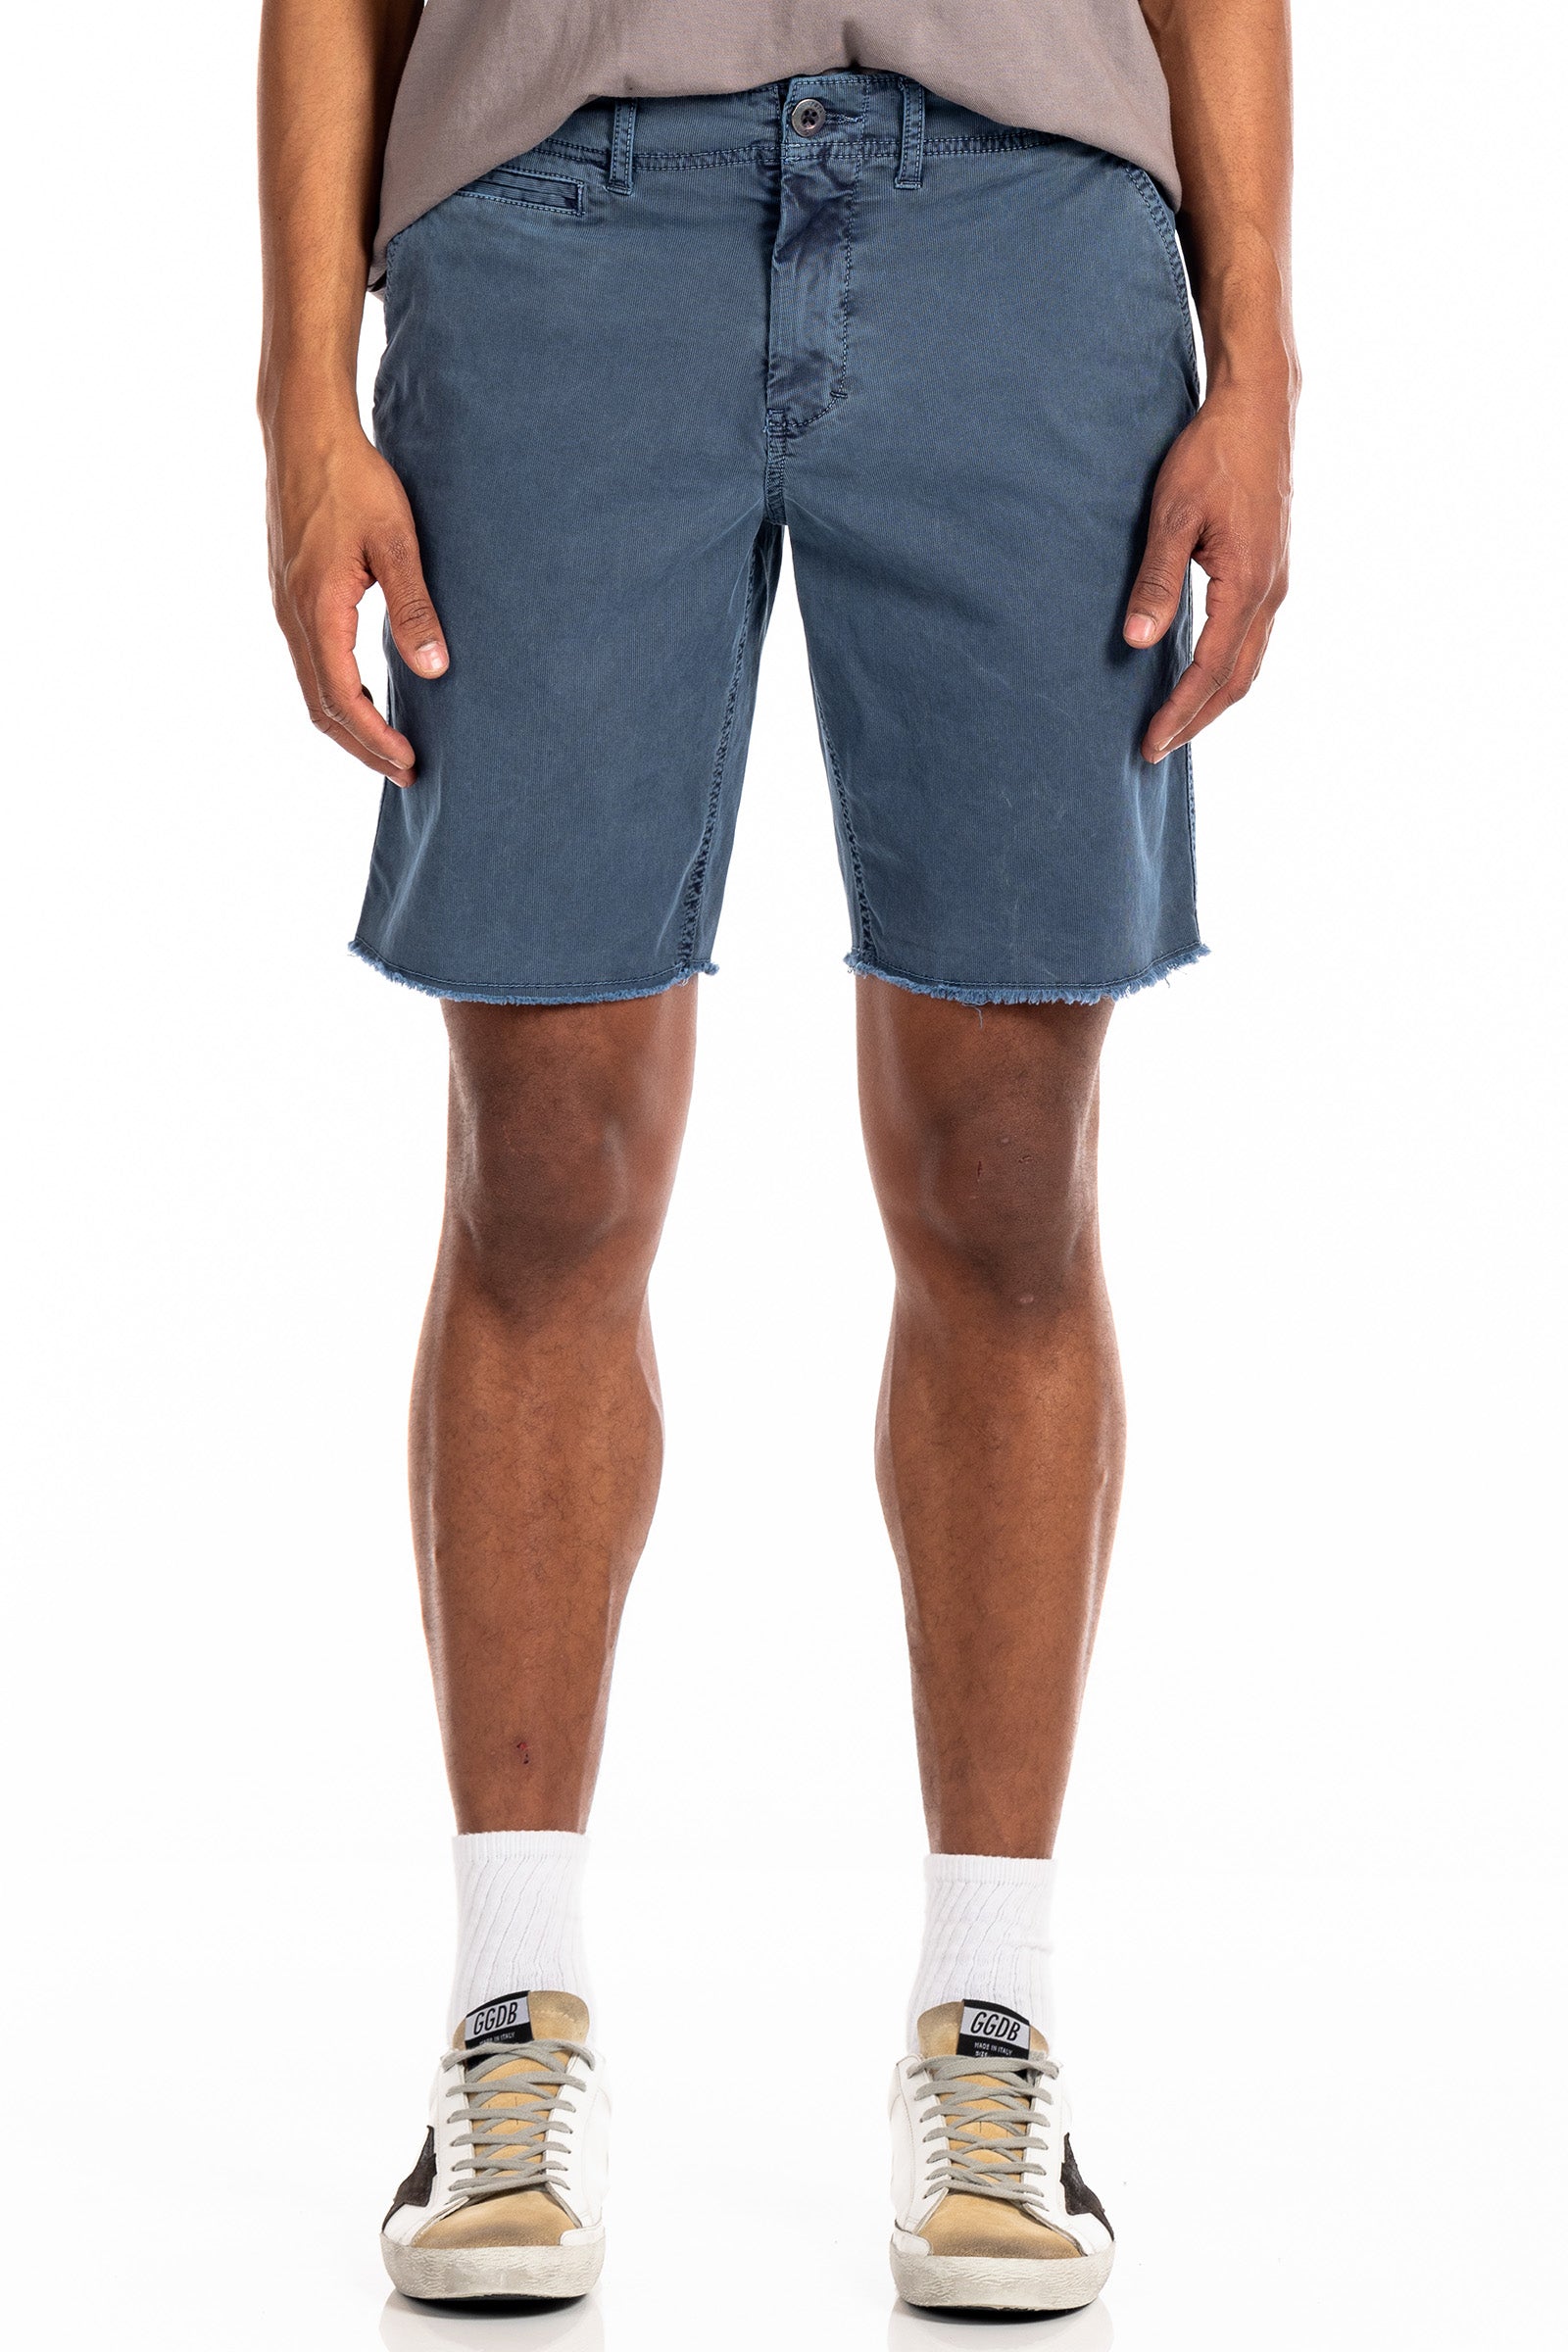 Original Paperbacks Brentwood Chino Short in Slate on Model Cropped Front View